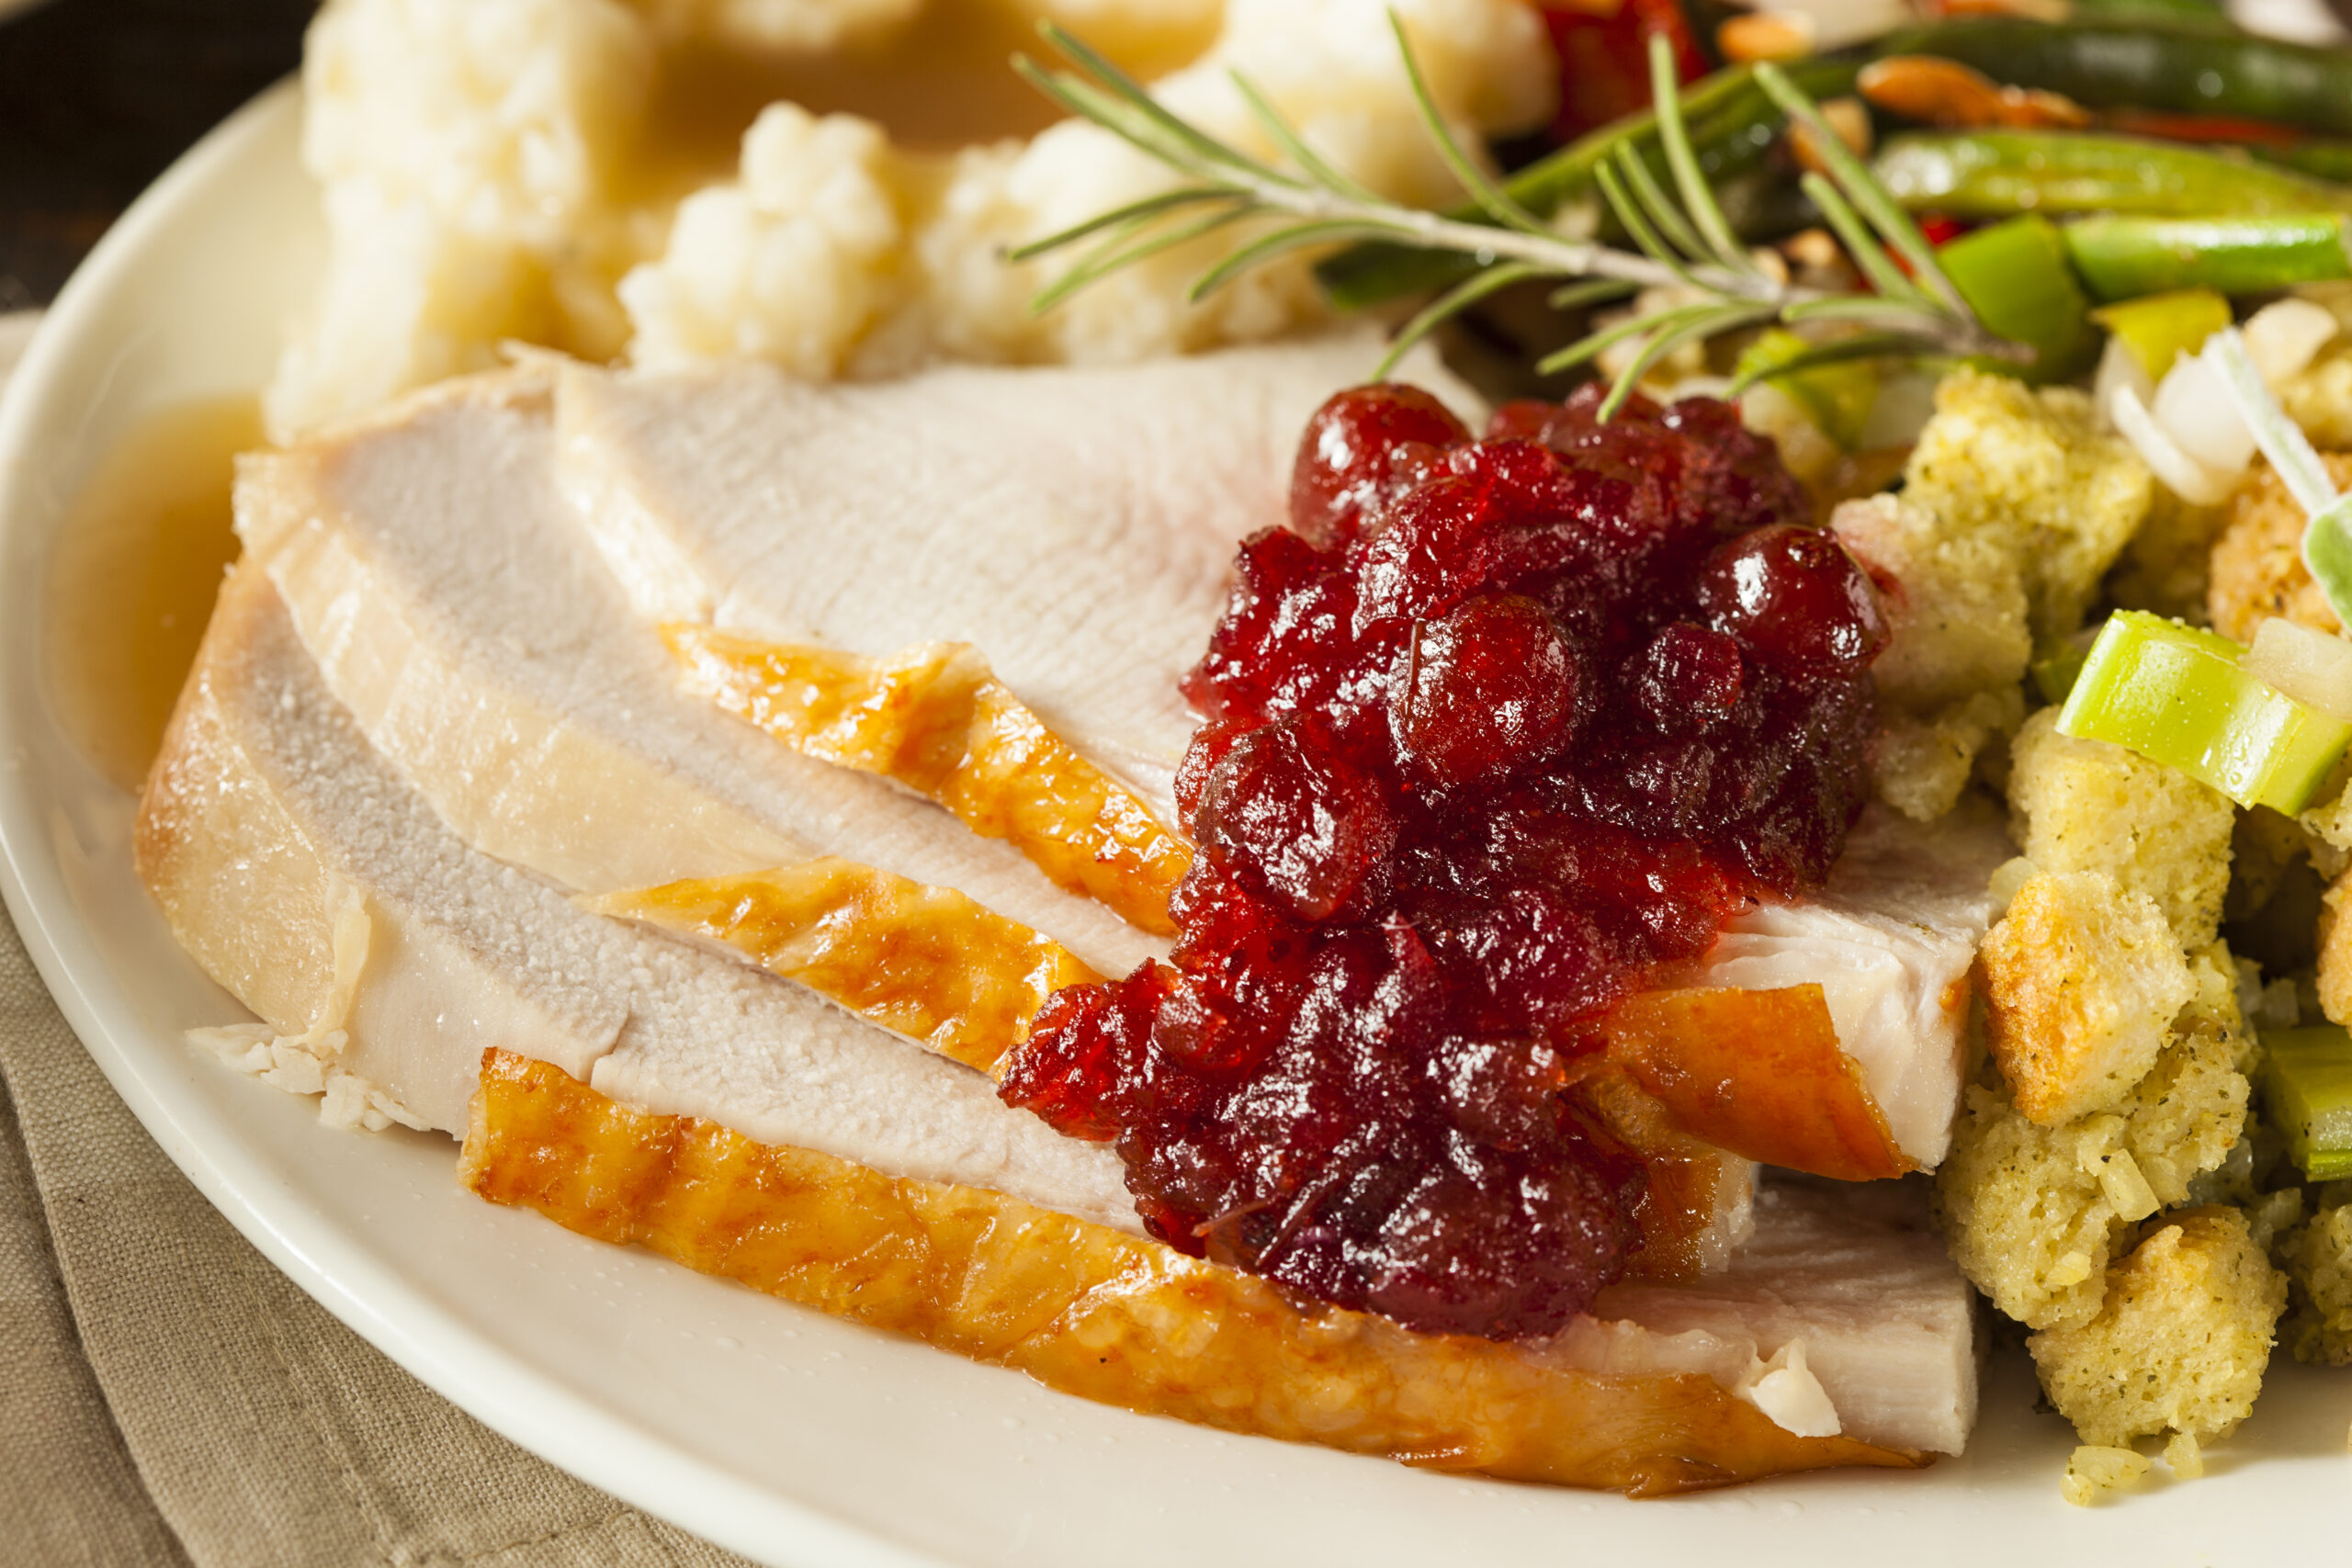 Turkey with cranberry sauce made from the crock pot turkey and stuffing.